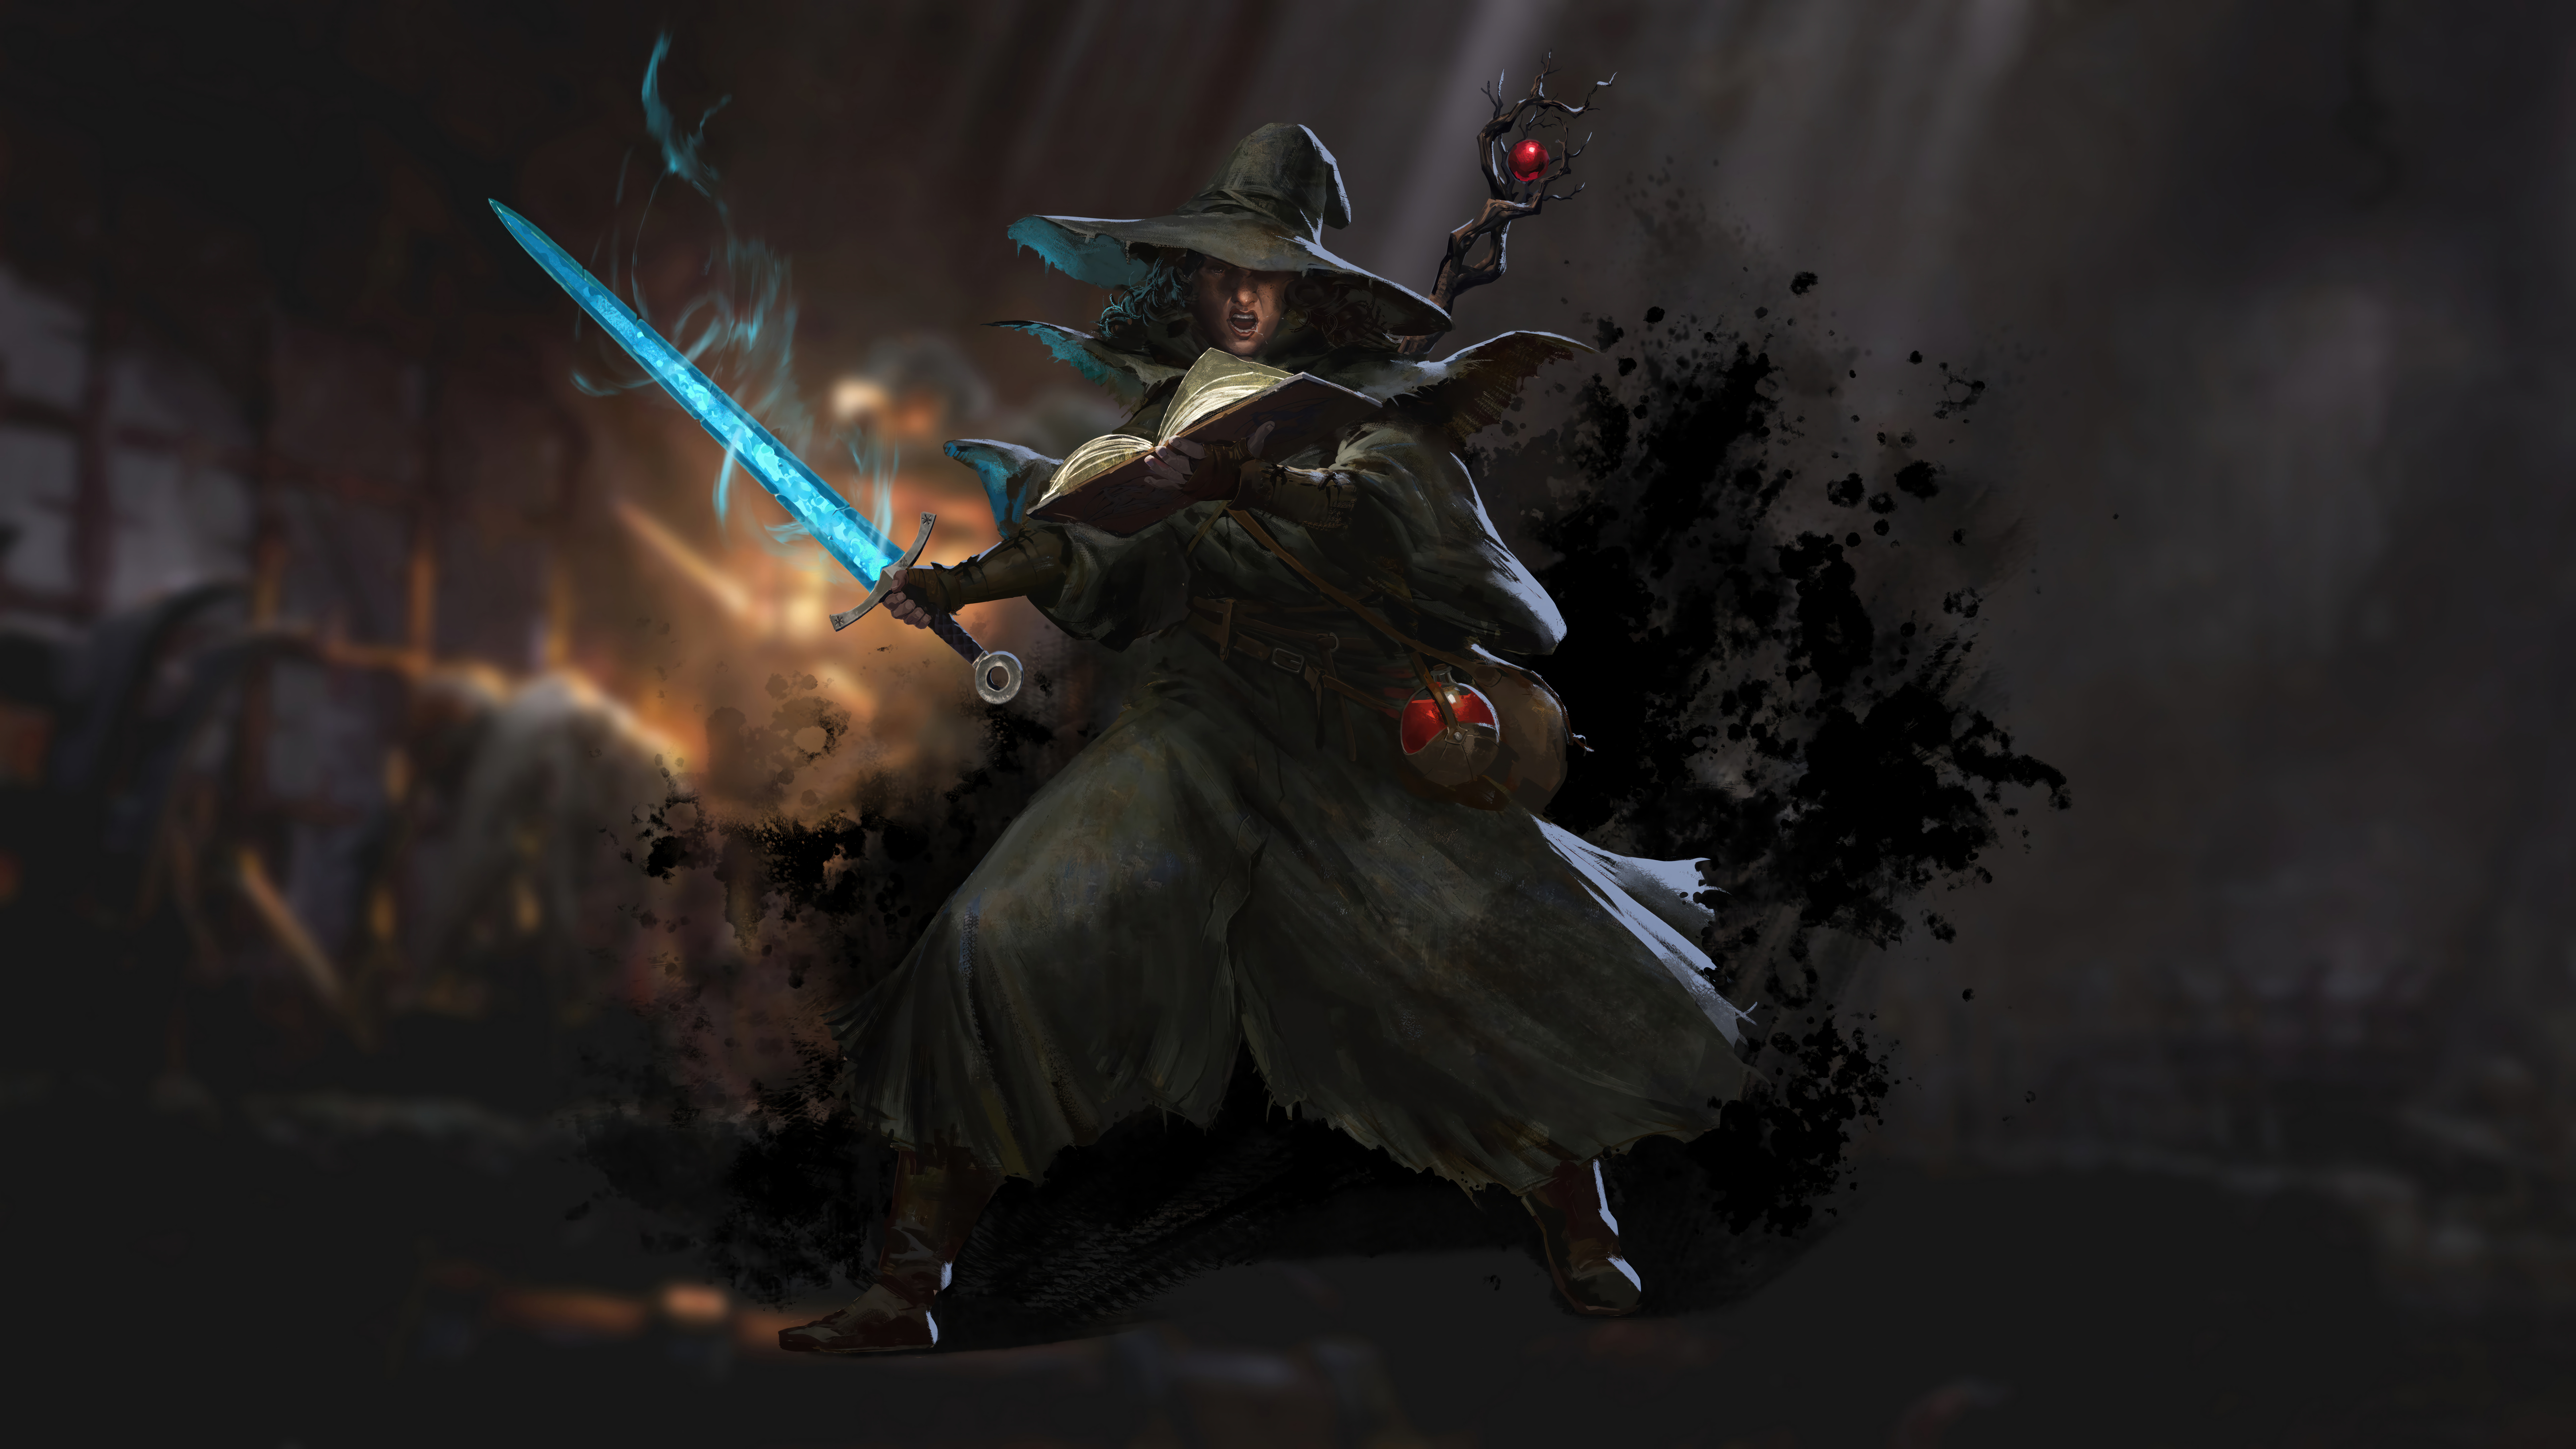 HD wallpaper of a mage from Dark and Darker casting a spell with a glowing blue sword, ideal for desktop background.